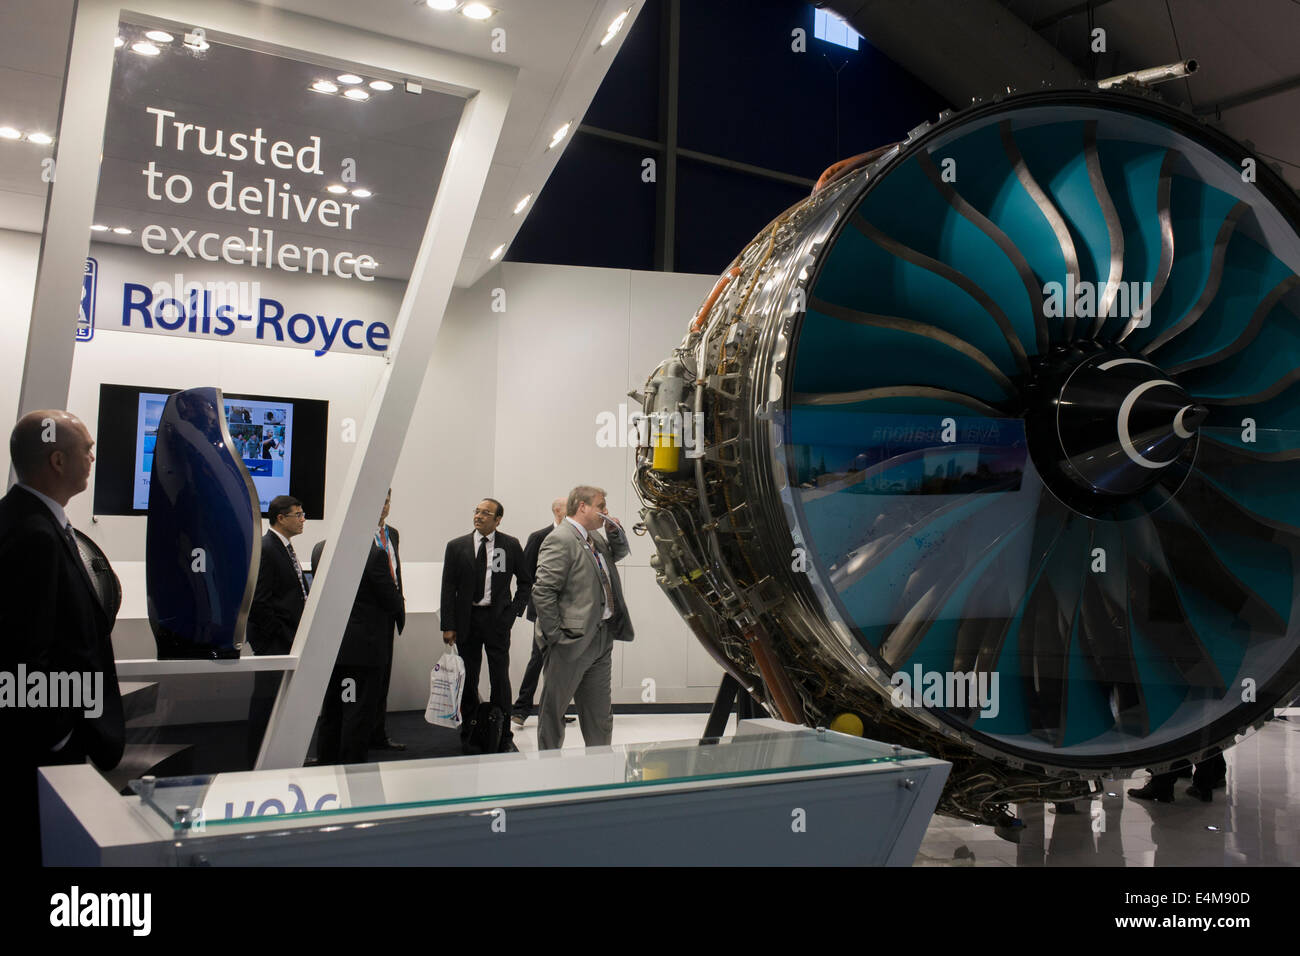 A full-size Trent jet engine is admired by delegates visiting British Rolls-Royce manufacturer's exhibition stand at the Farnborough Air Show, England. Rolls-Royce Trent is the name given to a family of three-spool, high bypass turbofan aircraft engines manufactured by Rolls-Royce plc. The engine is named after the River Trent in the Midlands of England. The civil aerospace business is a major manufacturer of aero engines for all sectors of the airliner and corporate jet market. Rolls-Royce powers more than 30 types of commercial aircraft and has almost 13,000 engines in service around  world. Stock Photo